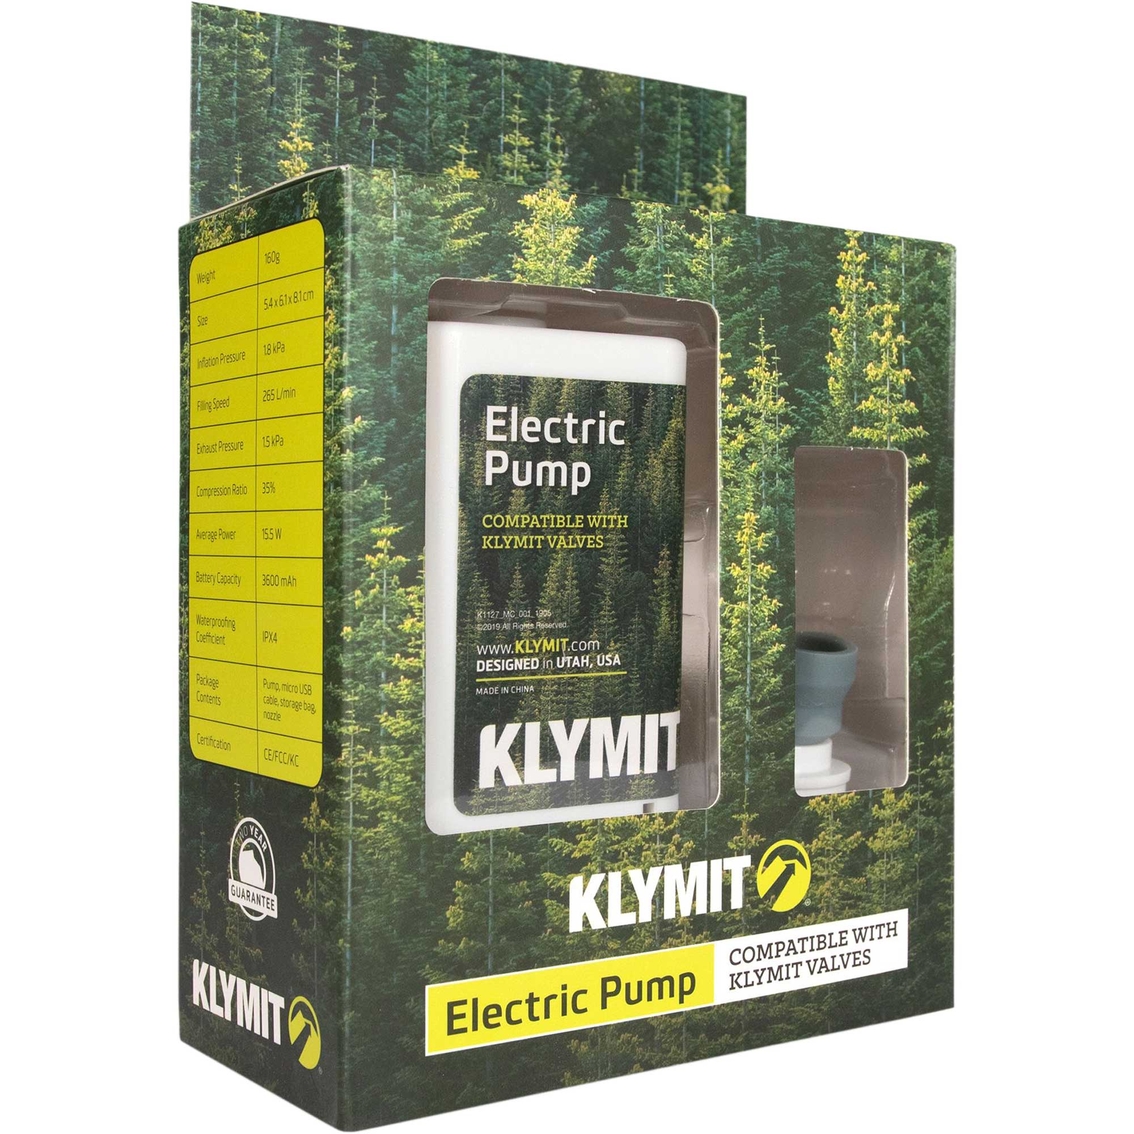 Klymit USB Rechargeable Pump - Image 2 of 7